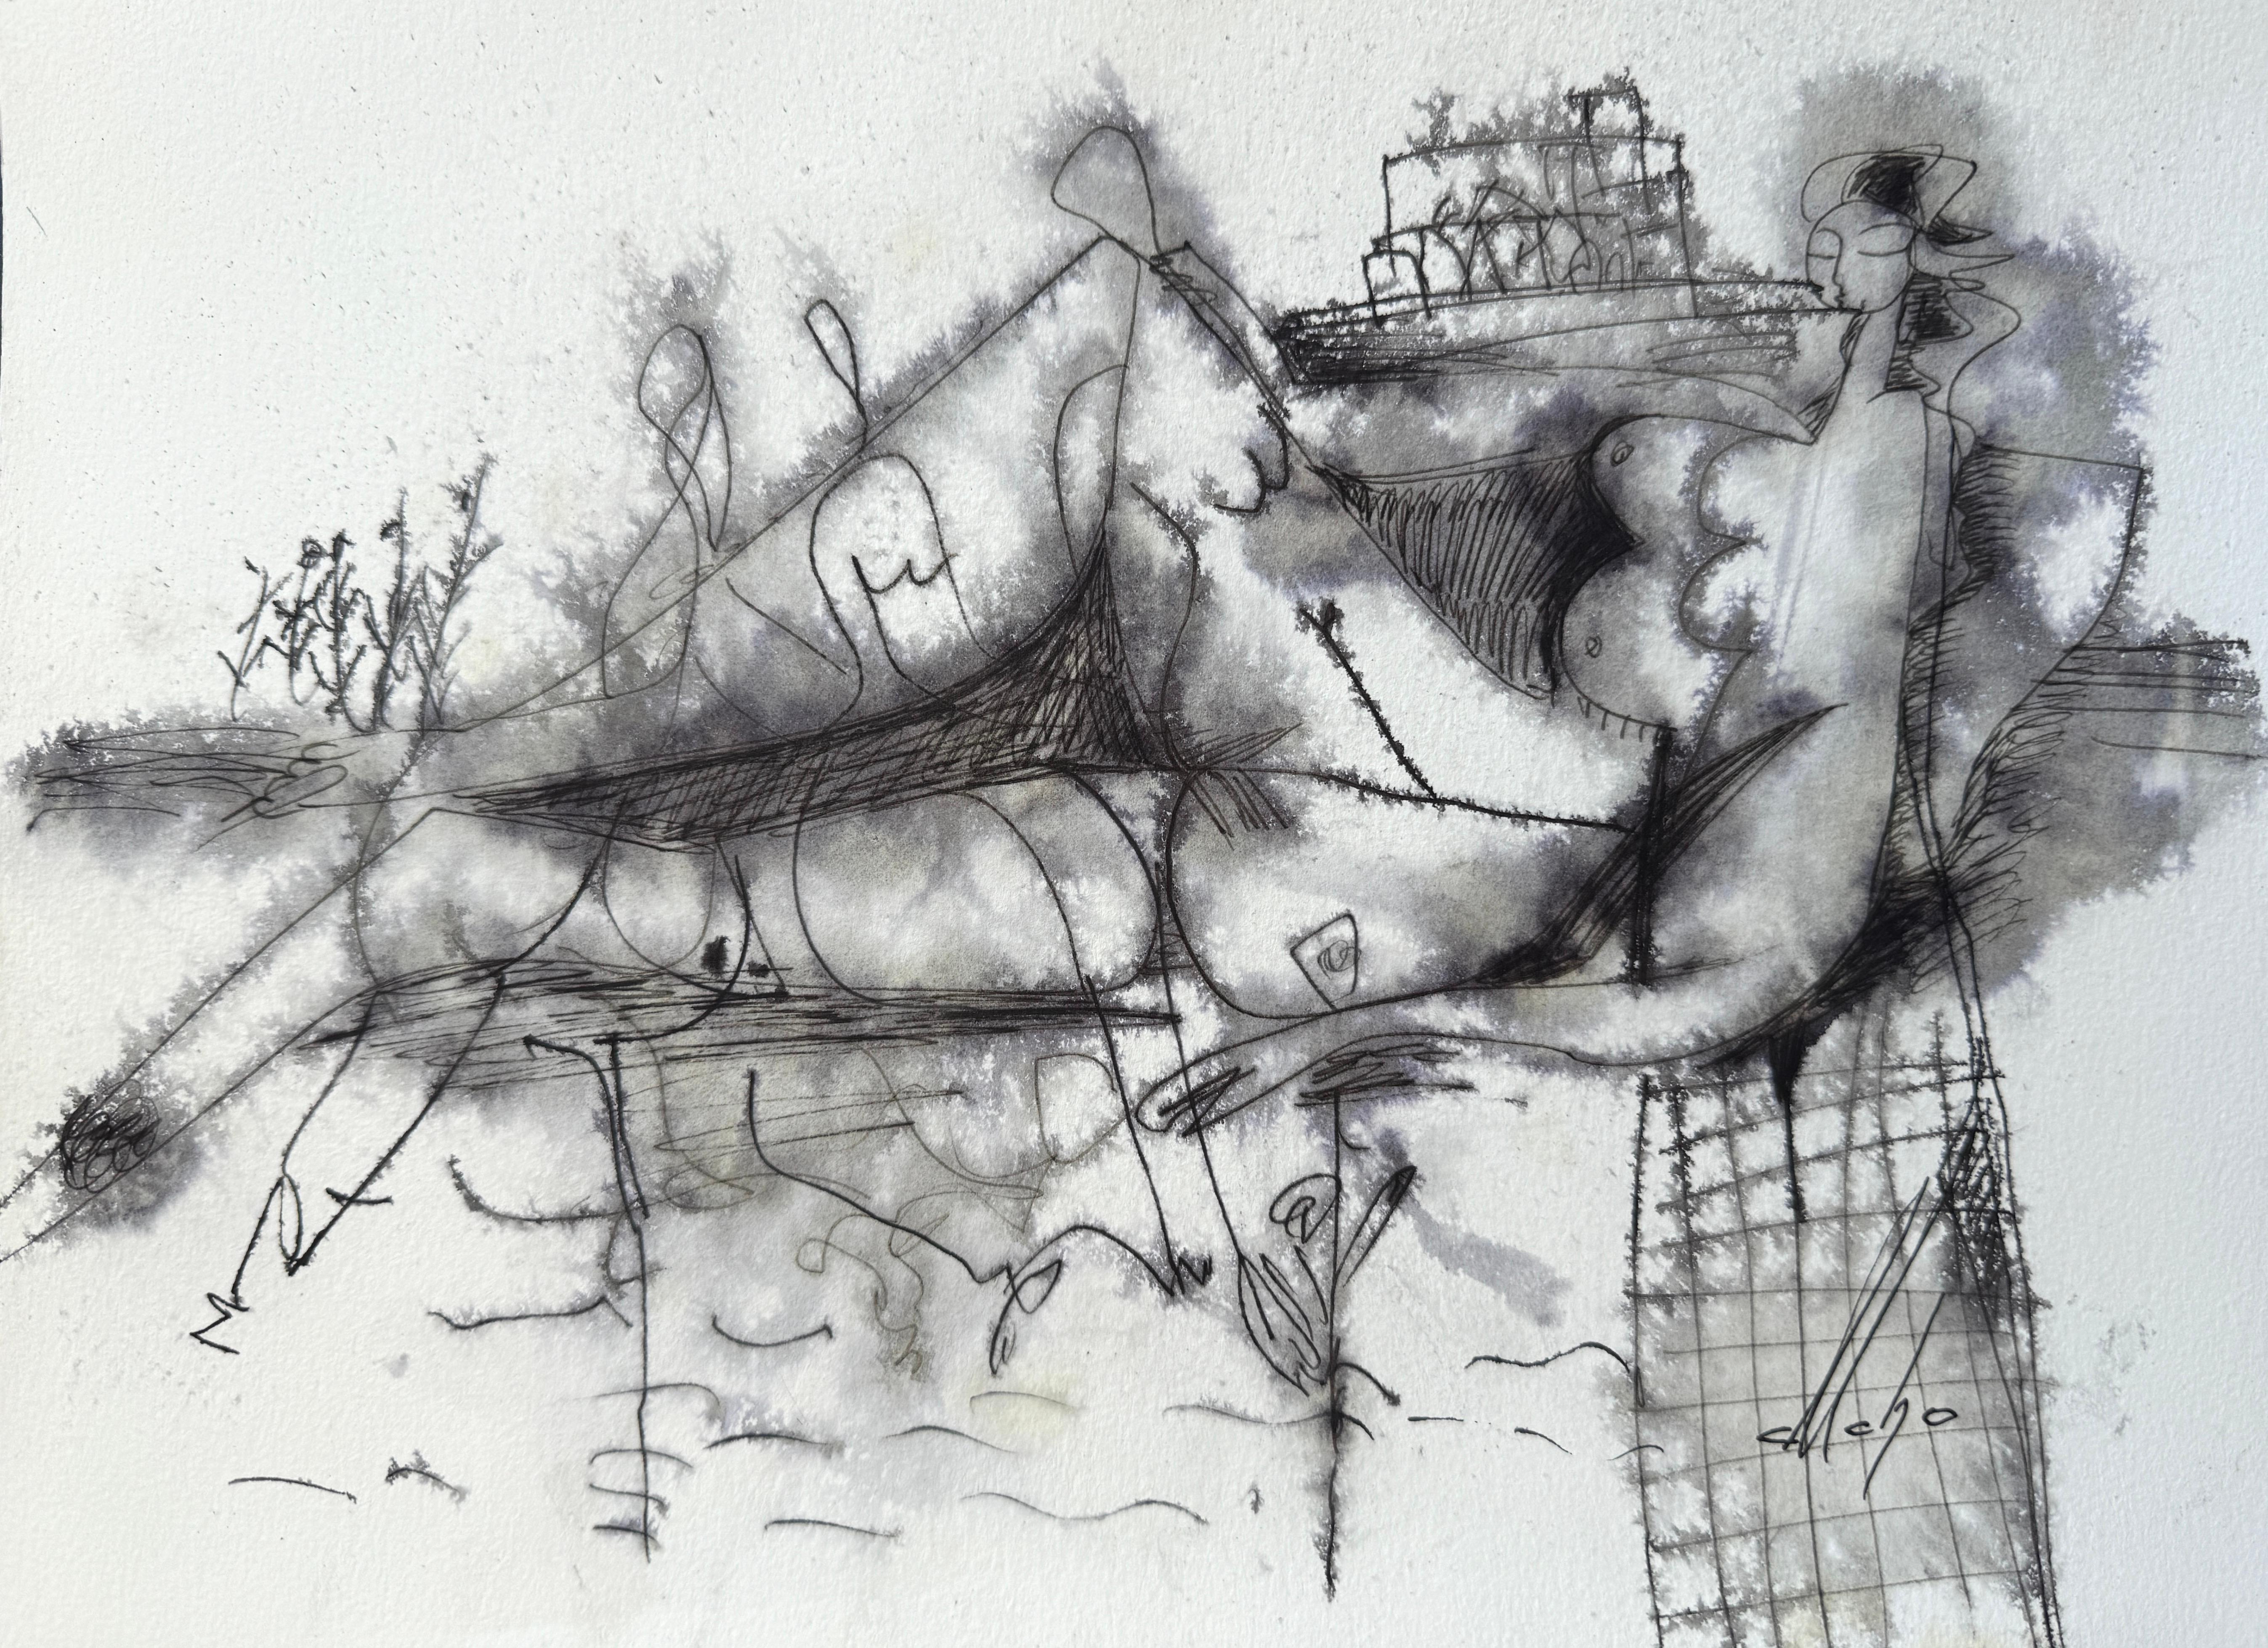 Mkrtich Sarkisyan (Mcho) Figurative Art - Memories, Figurative Original Painting, Ink on Paper, Black and White 